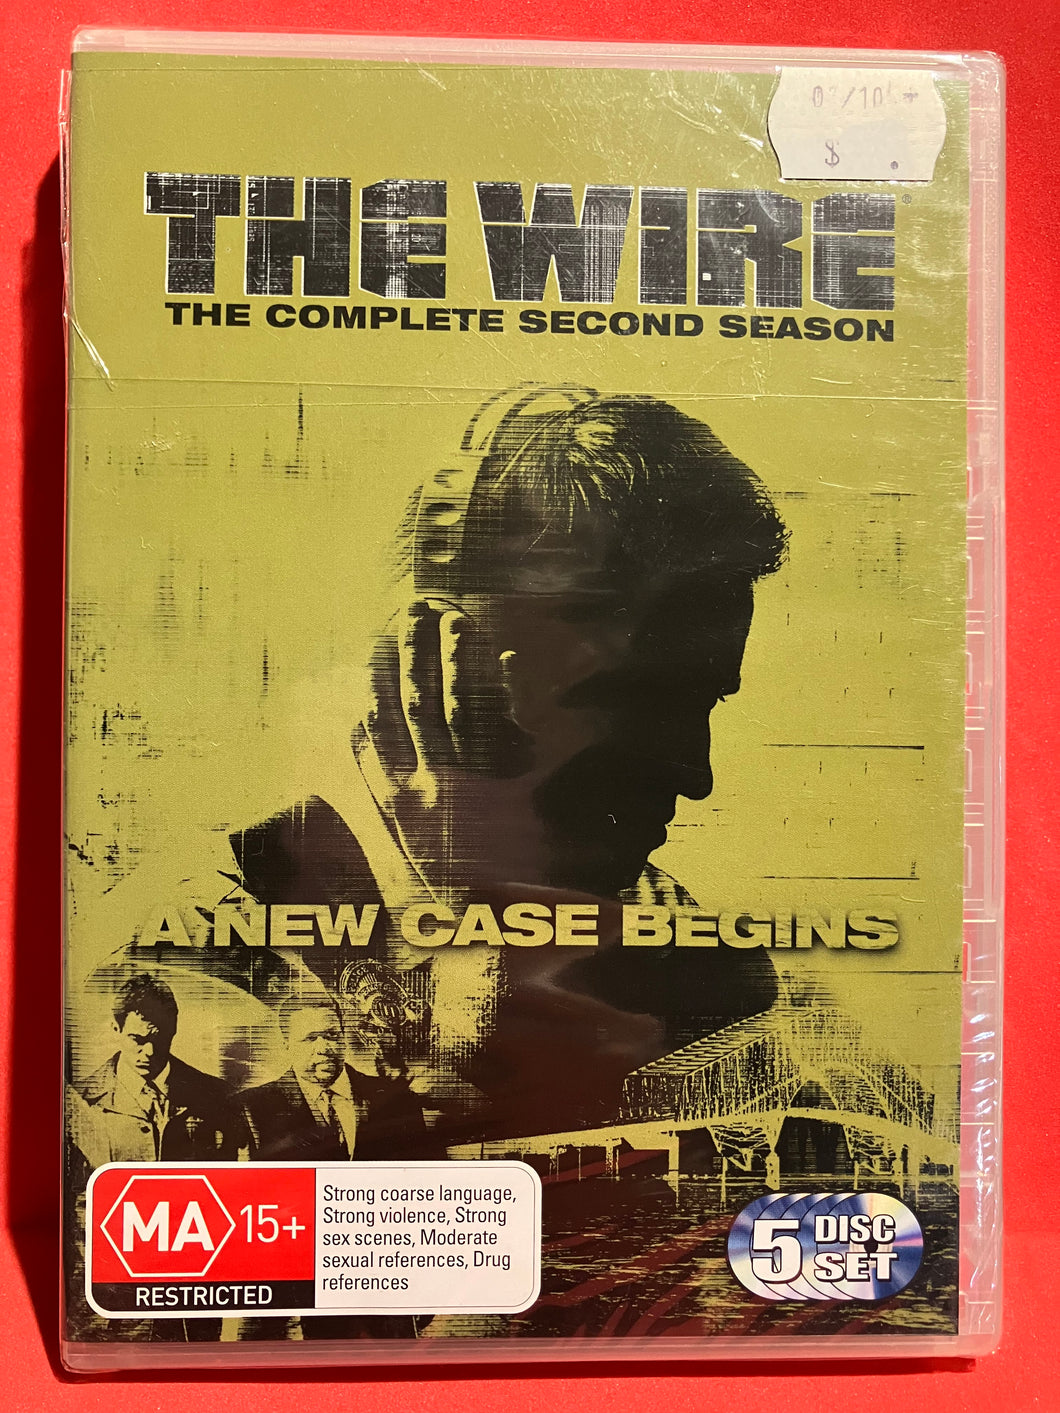 THE WIRE - COMPLETE SECOND SEASON - DVD (SEALED)